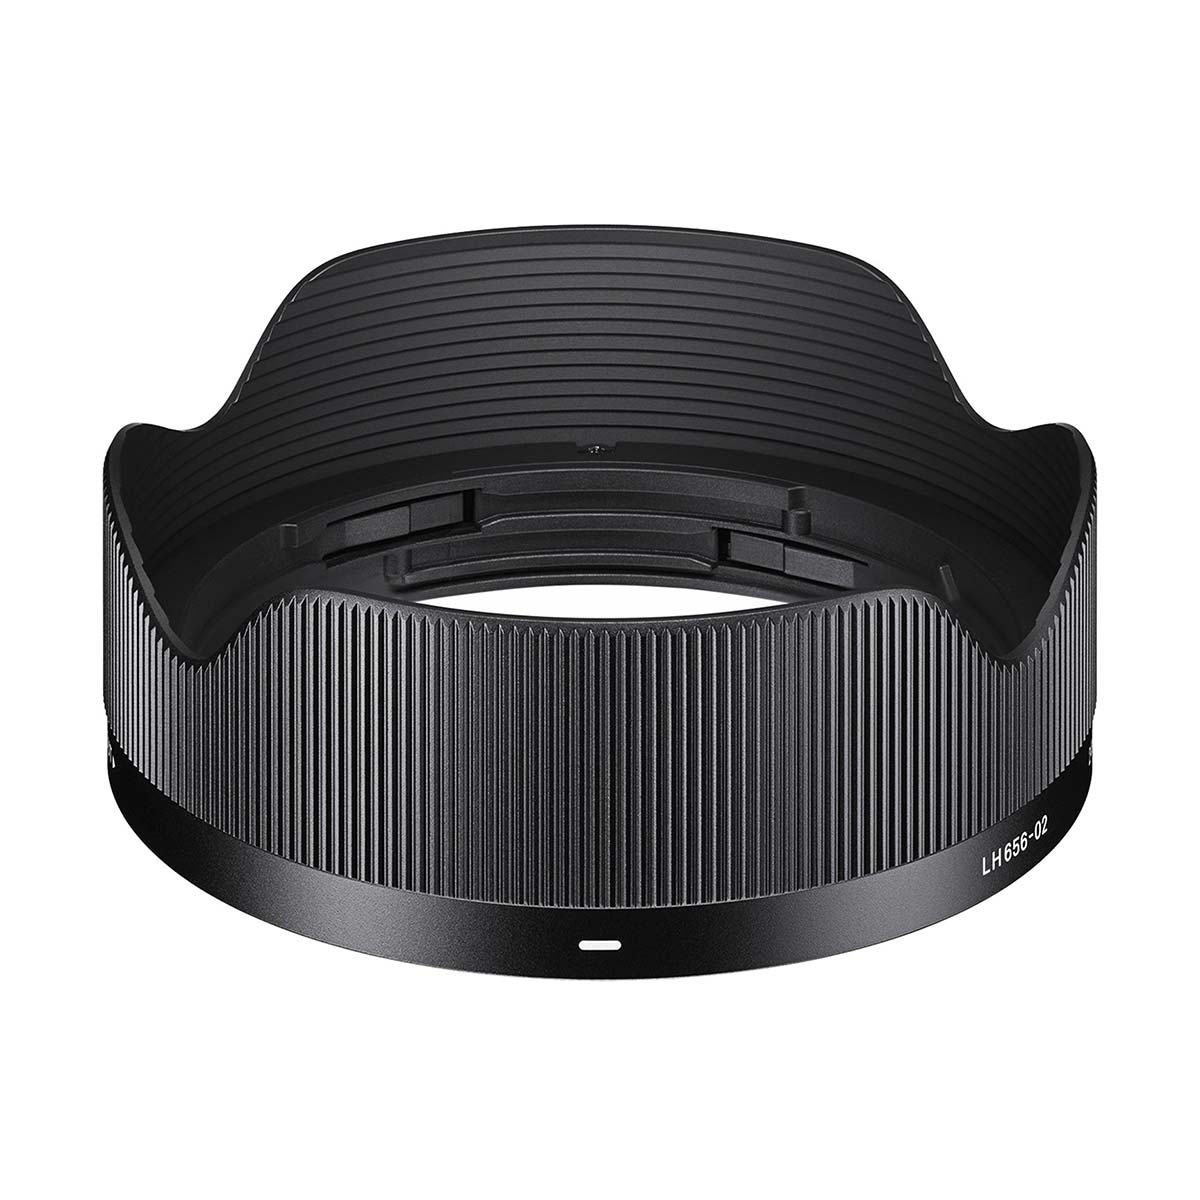 Sigma 24mm f/2.0 DG DN Contemporary Lens for Sony FE